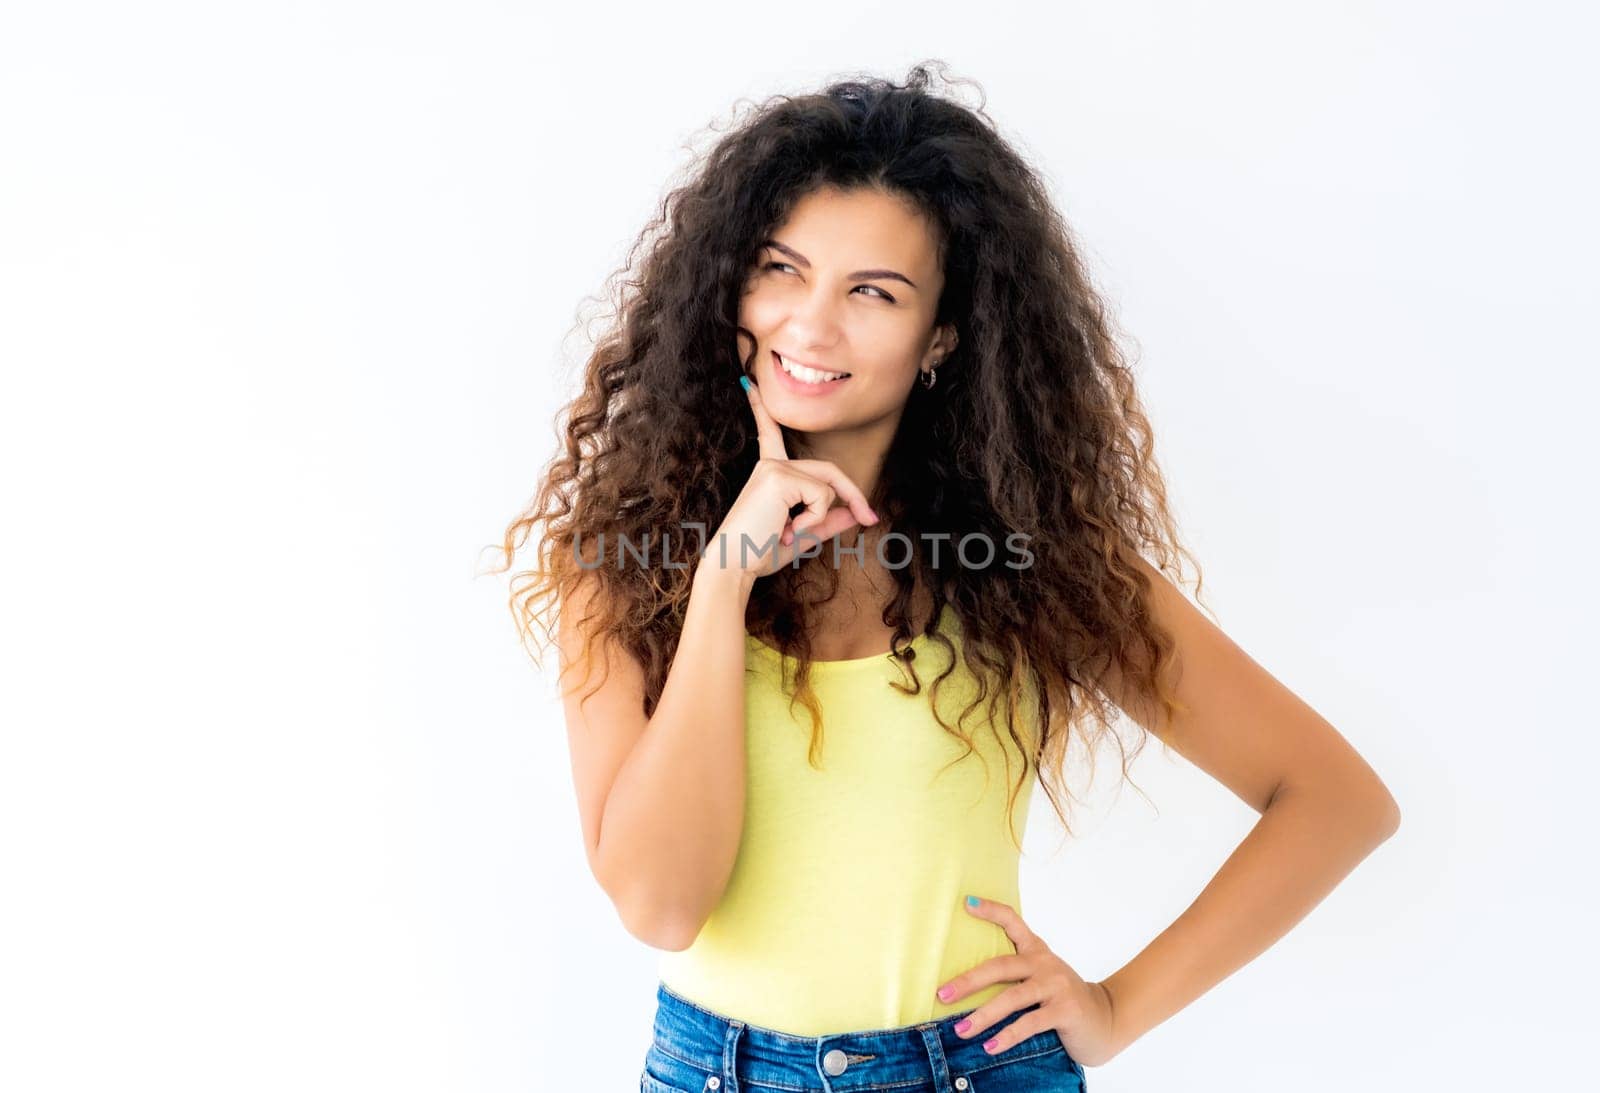 Happy young girl laughing holding hand near face